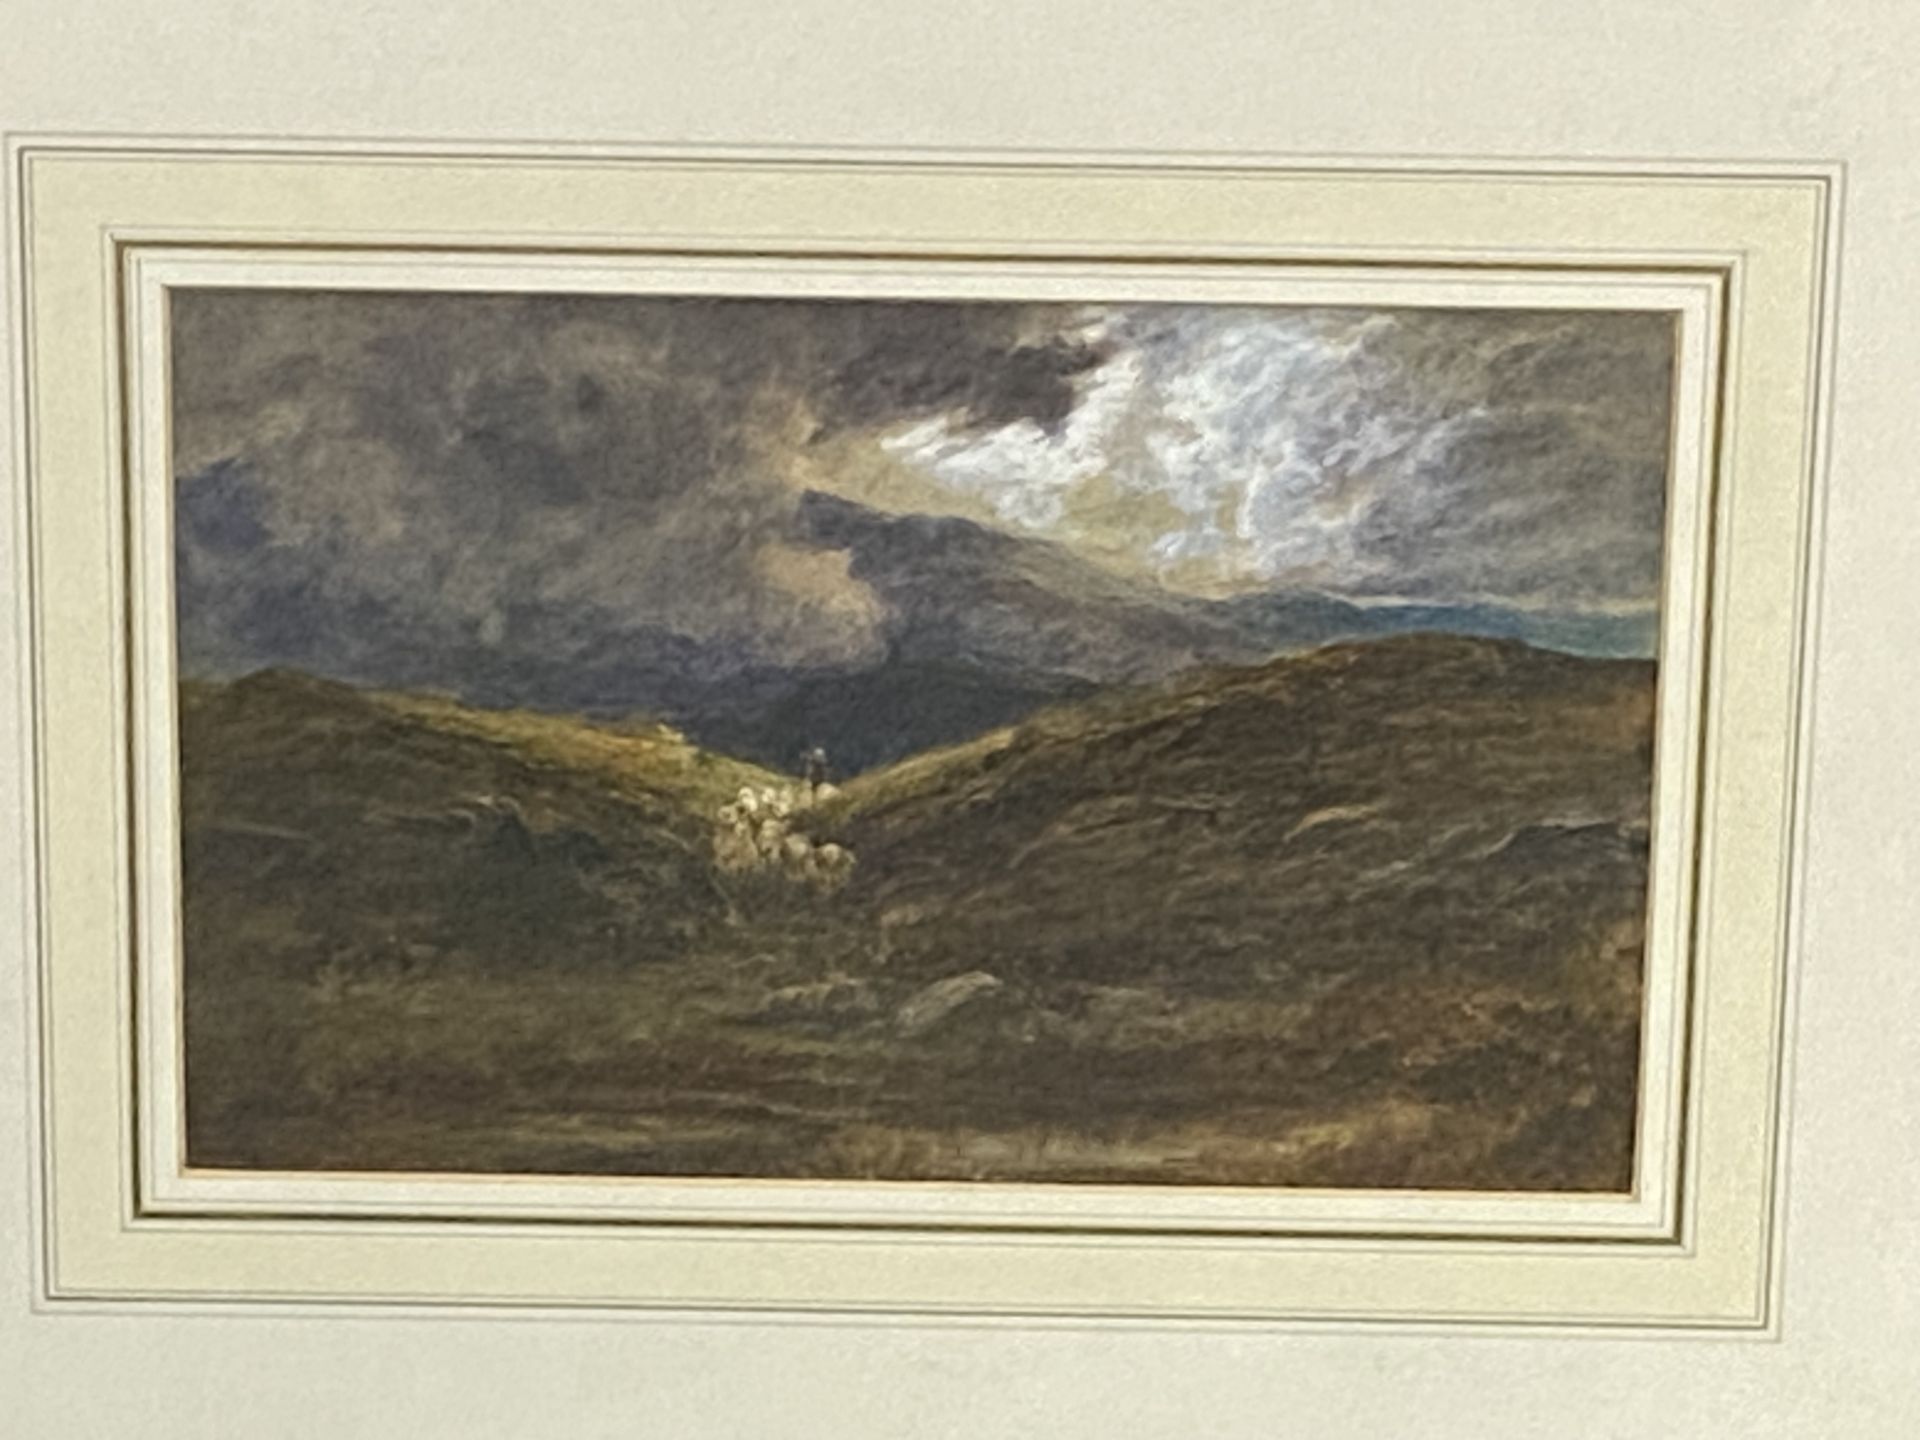 Framed and glazed watercolour of sheep on a moor - Bild 3 aus 3